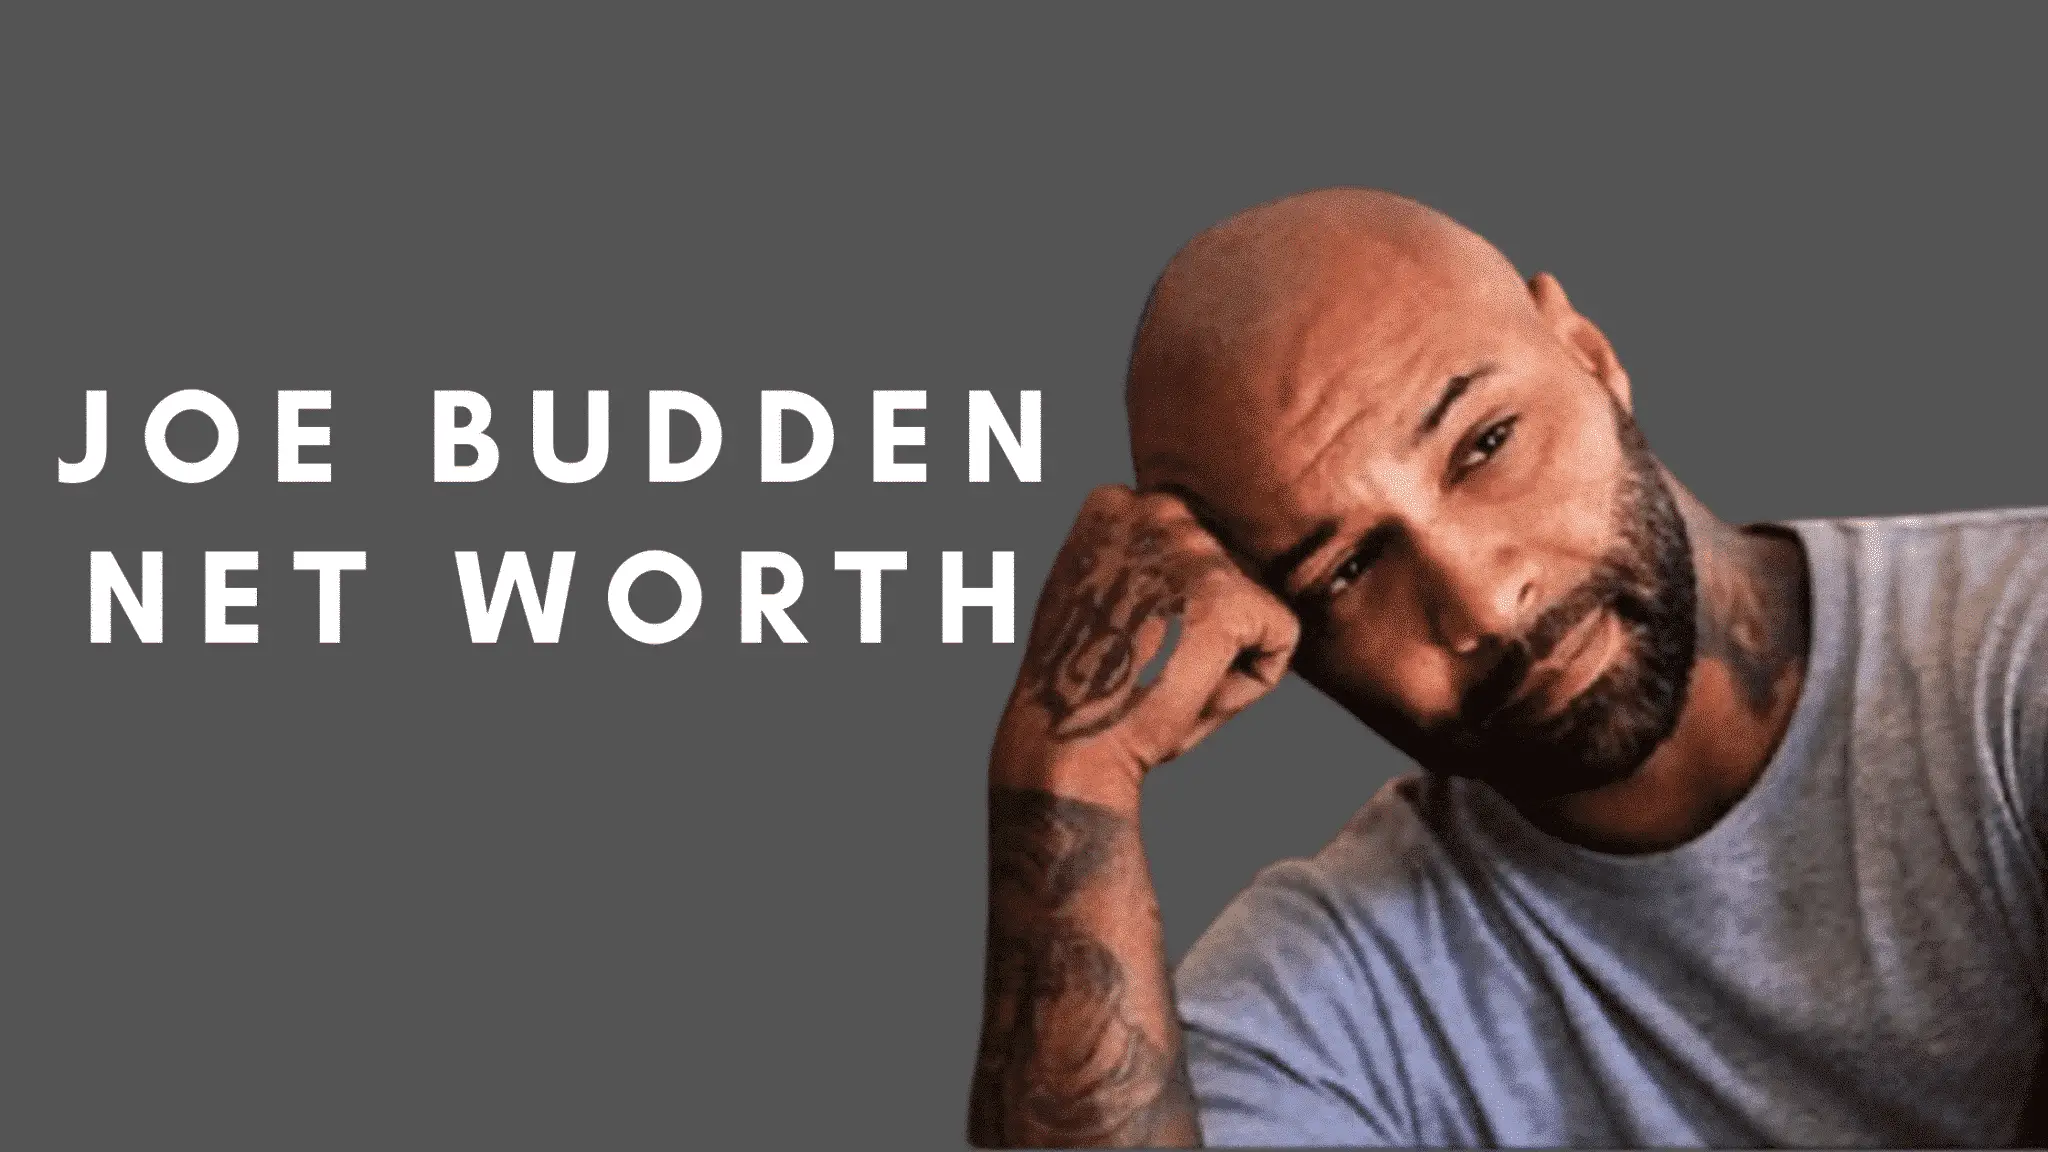 Joe Budden Net Worth – A Success Story To Take Lessons From